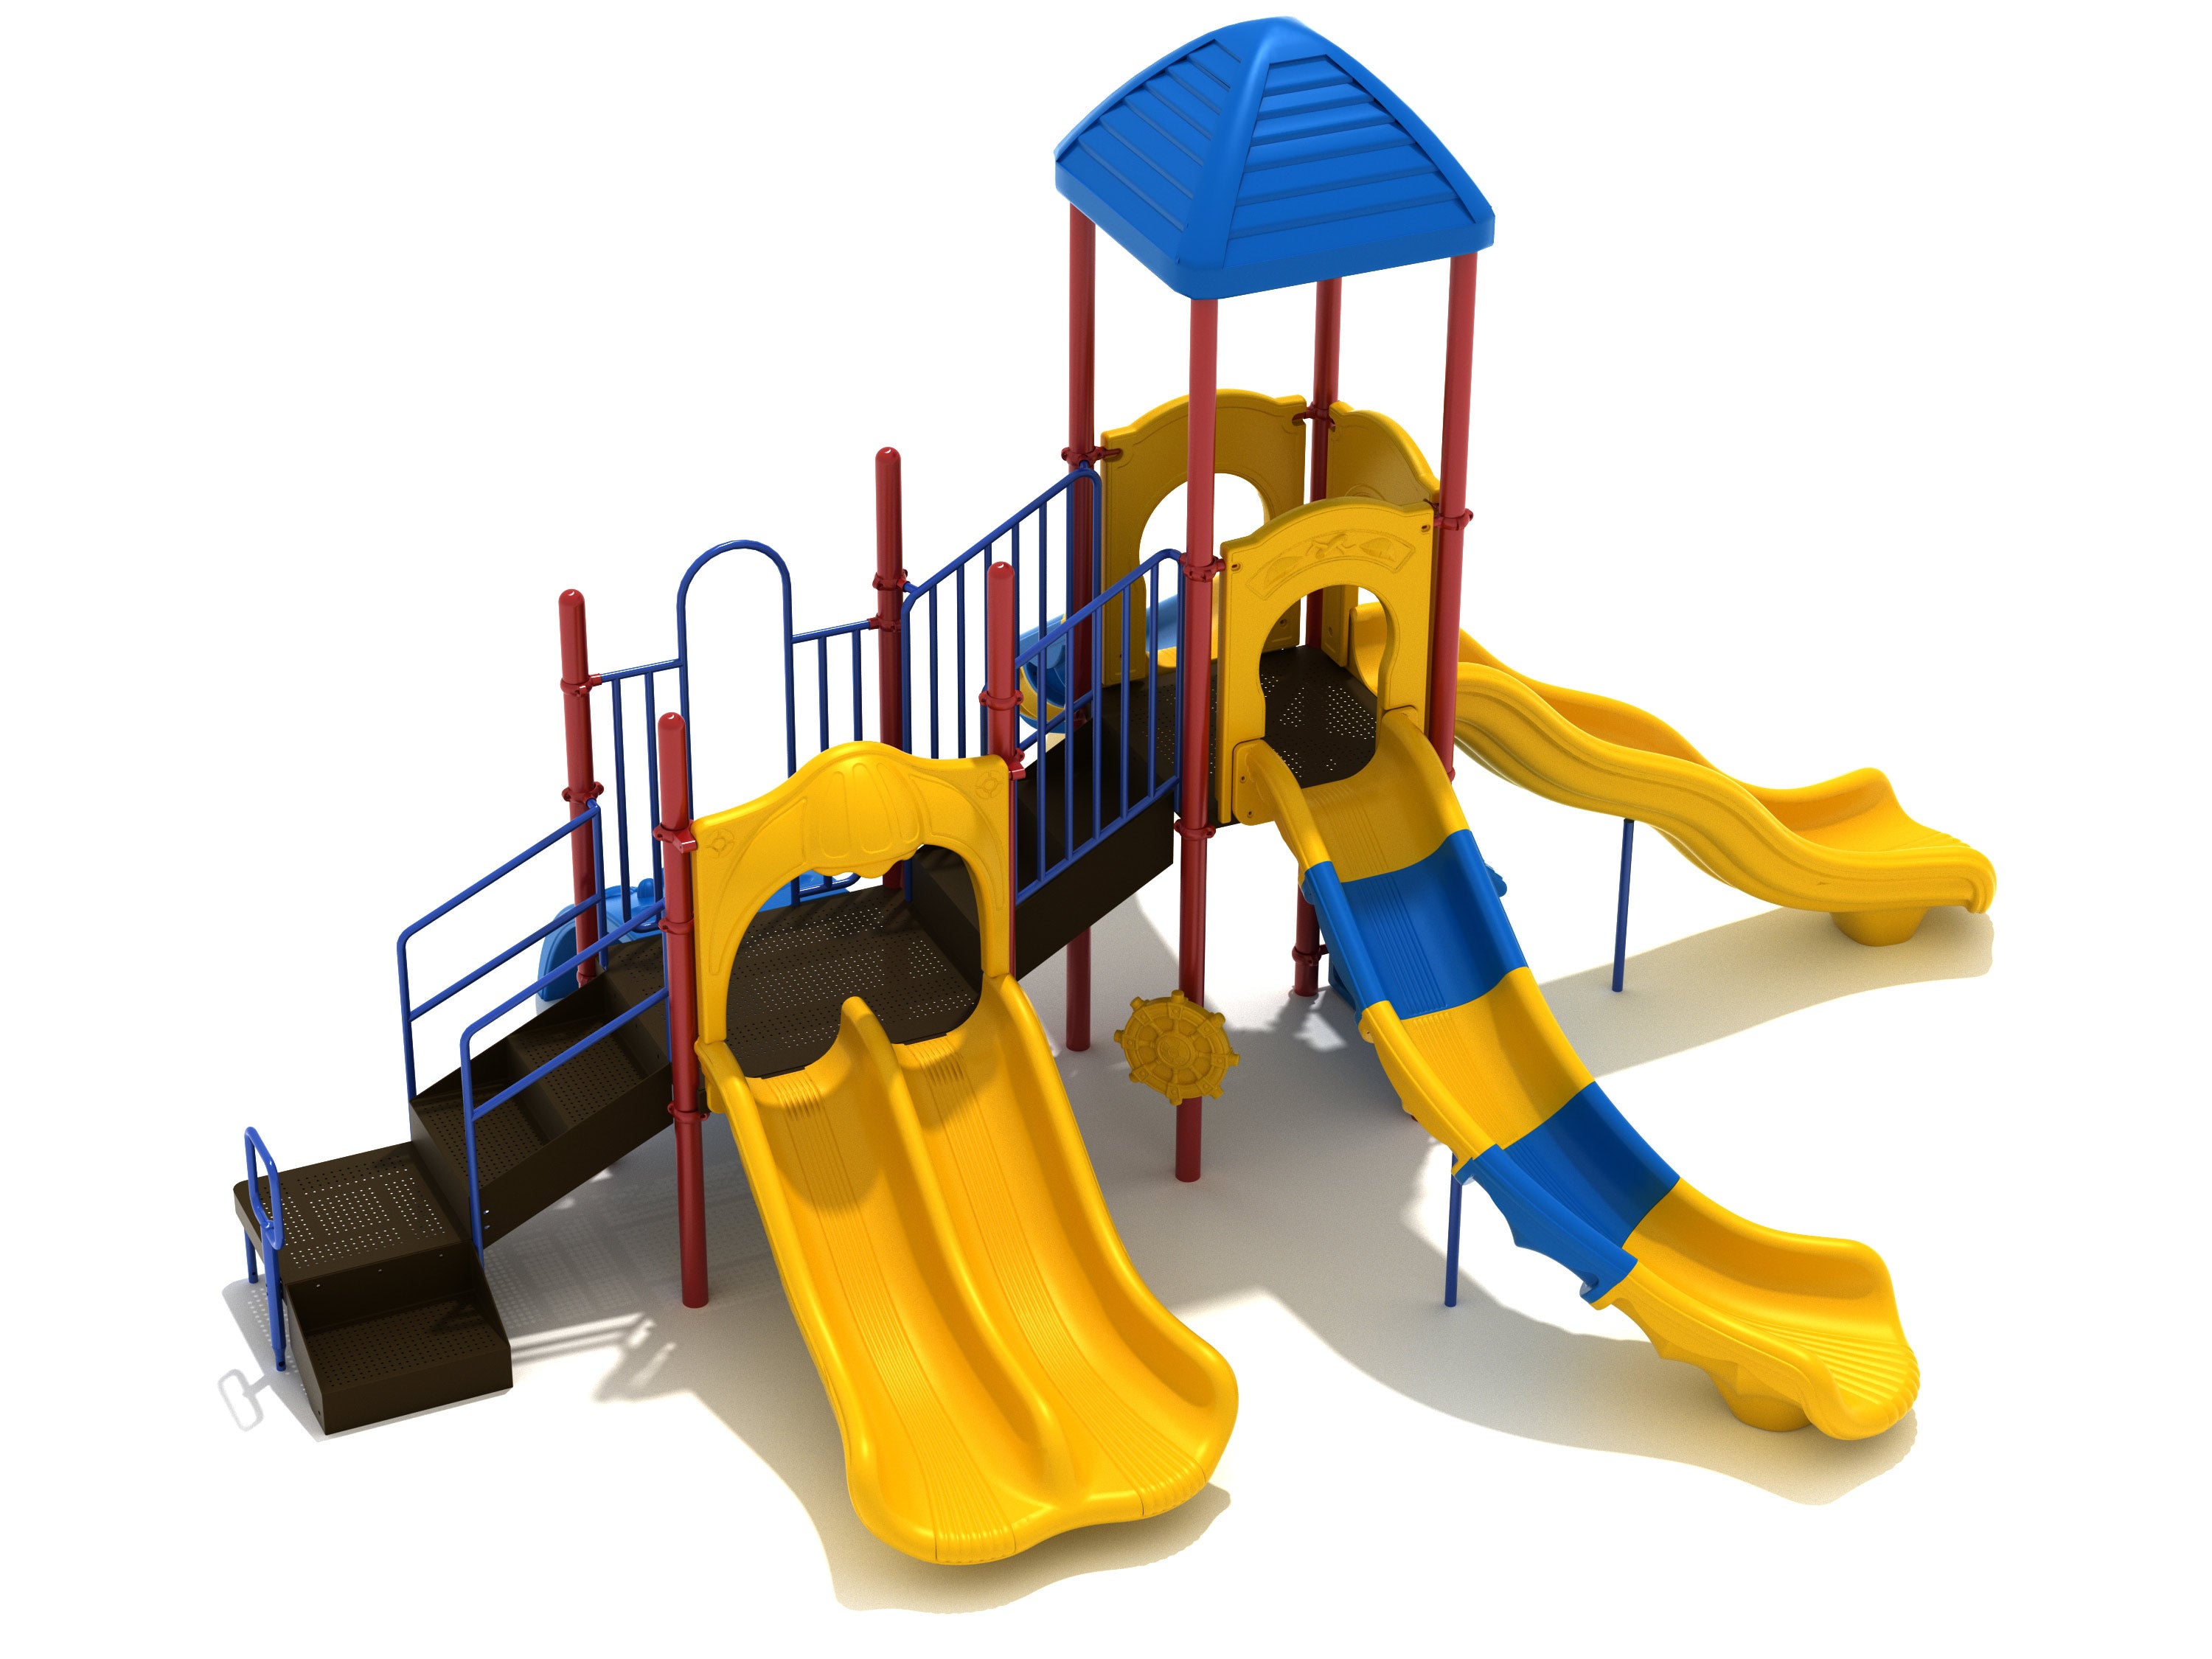 Divinity Hill Play System Primary Colors